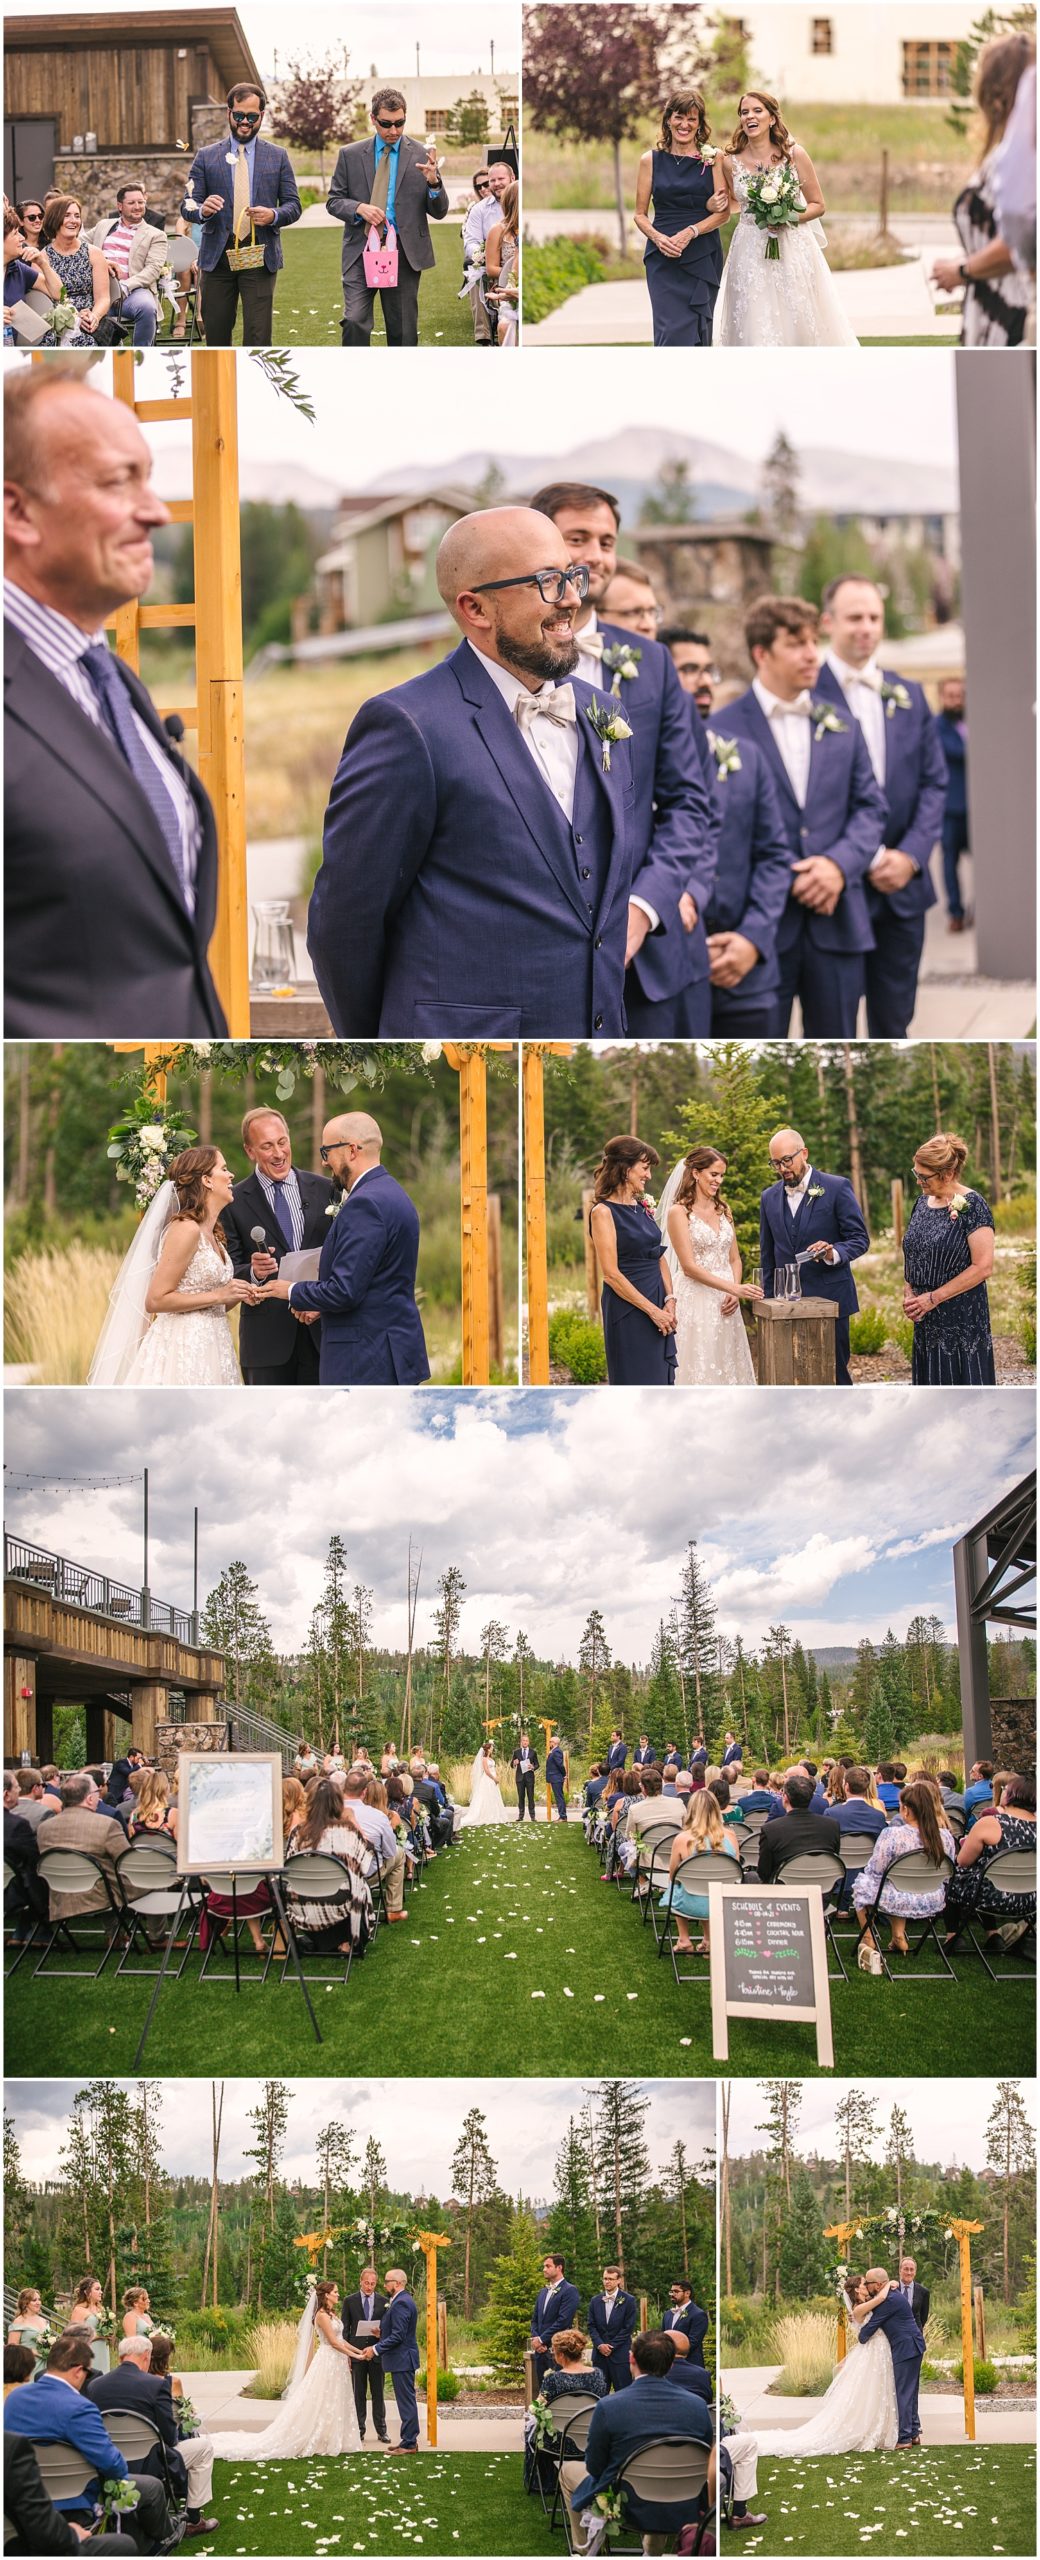 Winter Park wedding ceremony at Headwaters Center